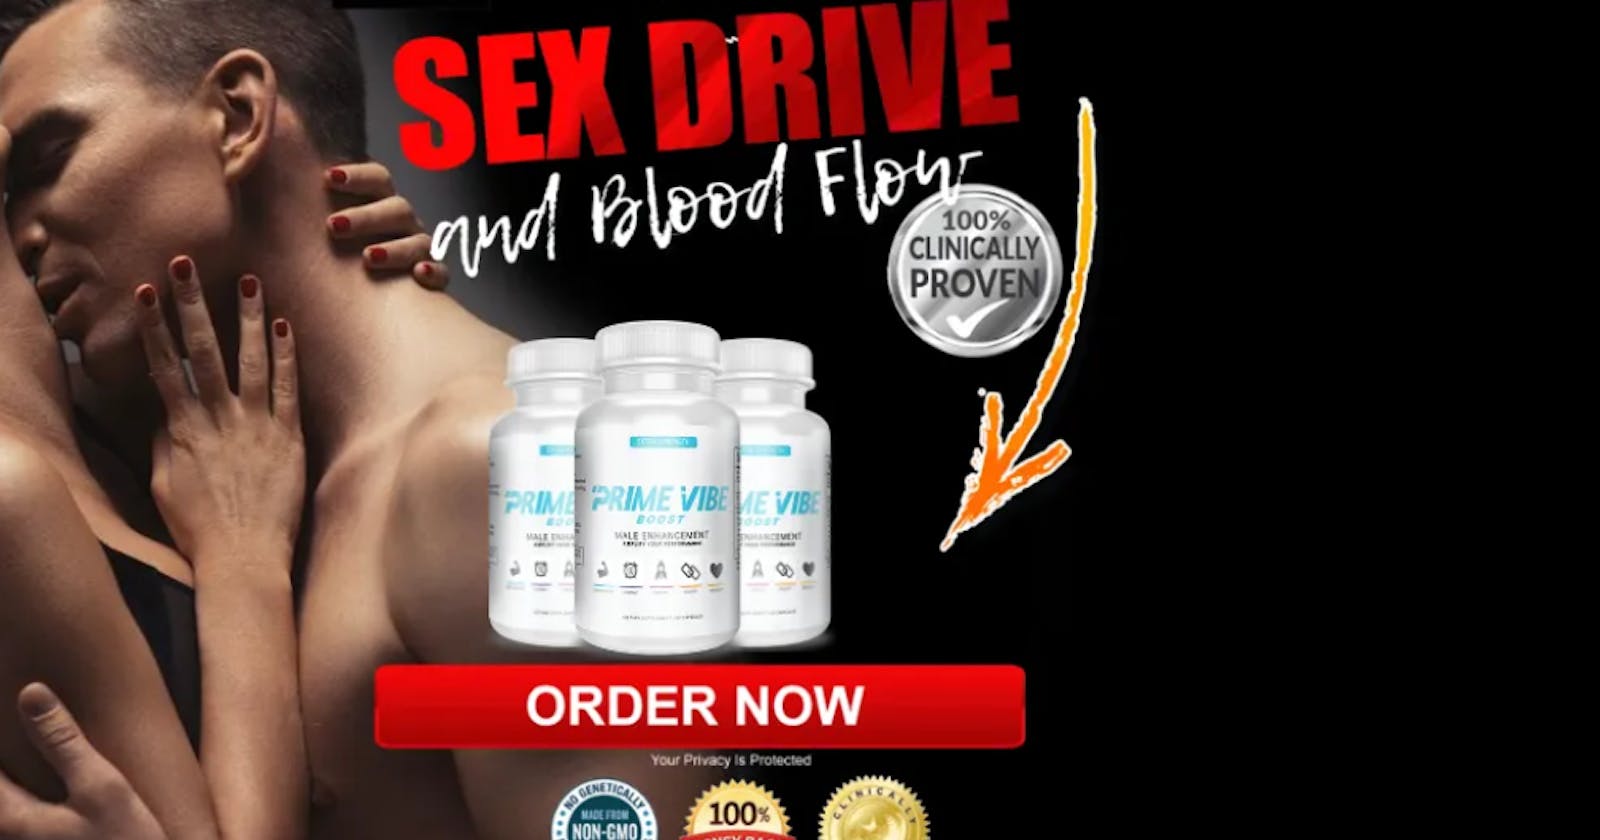 Prime Vibe Boost Male Enhancement What Is Reality? Benefits, Side Effects and More.